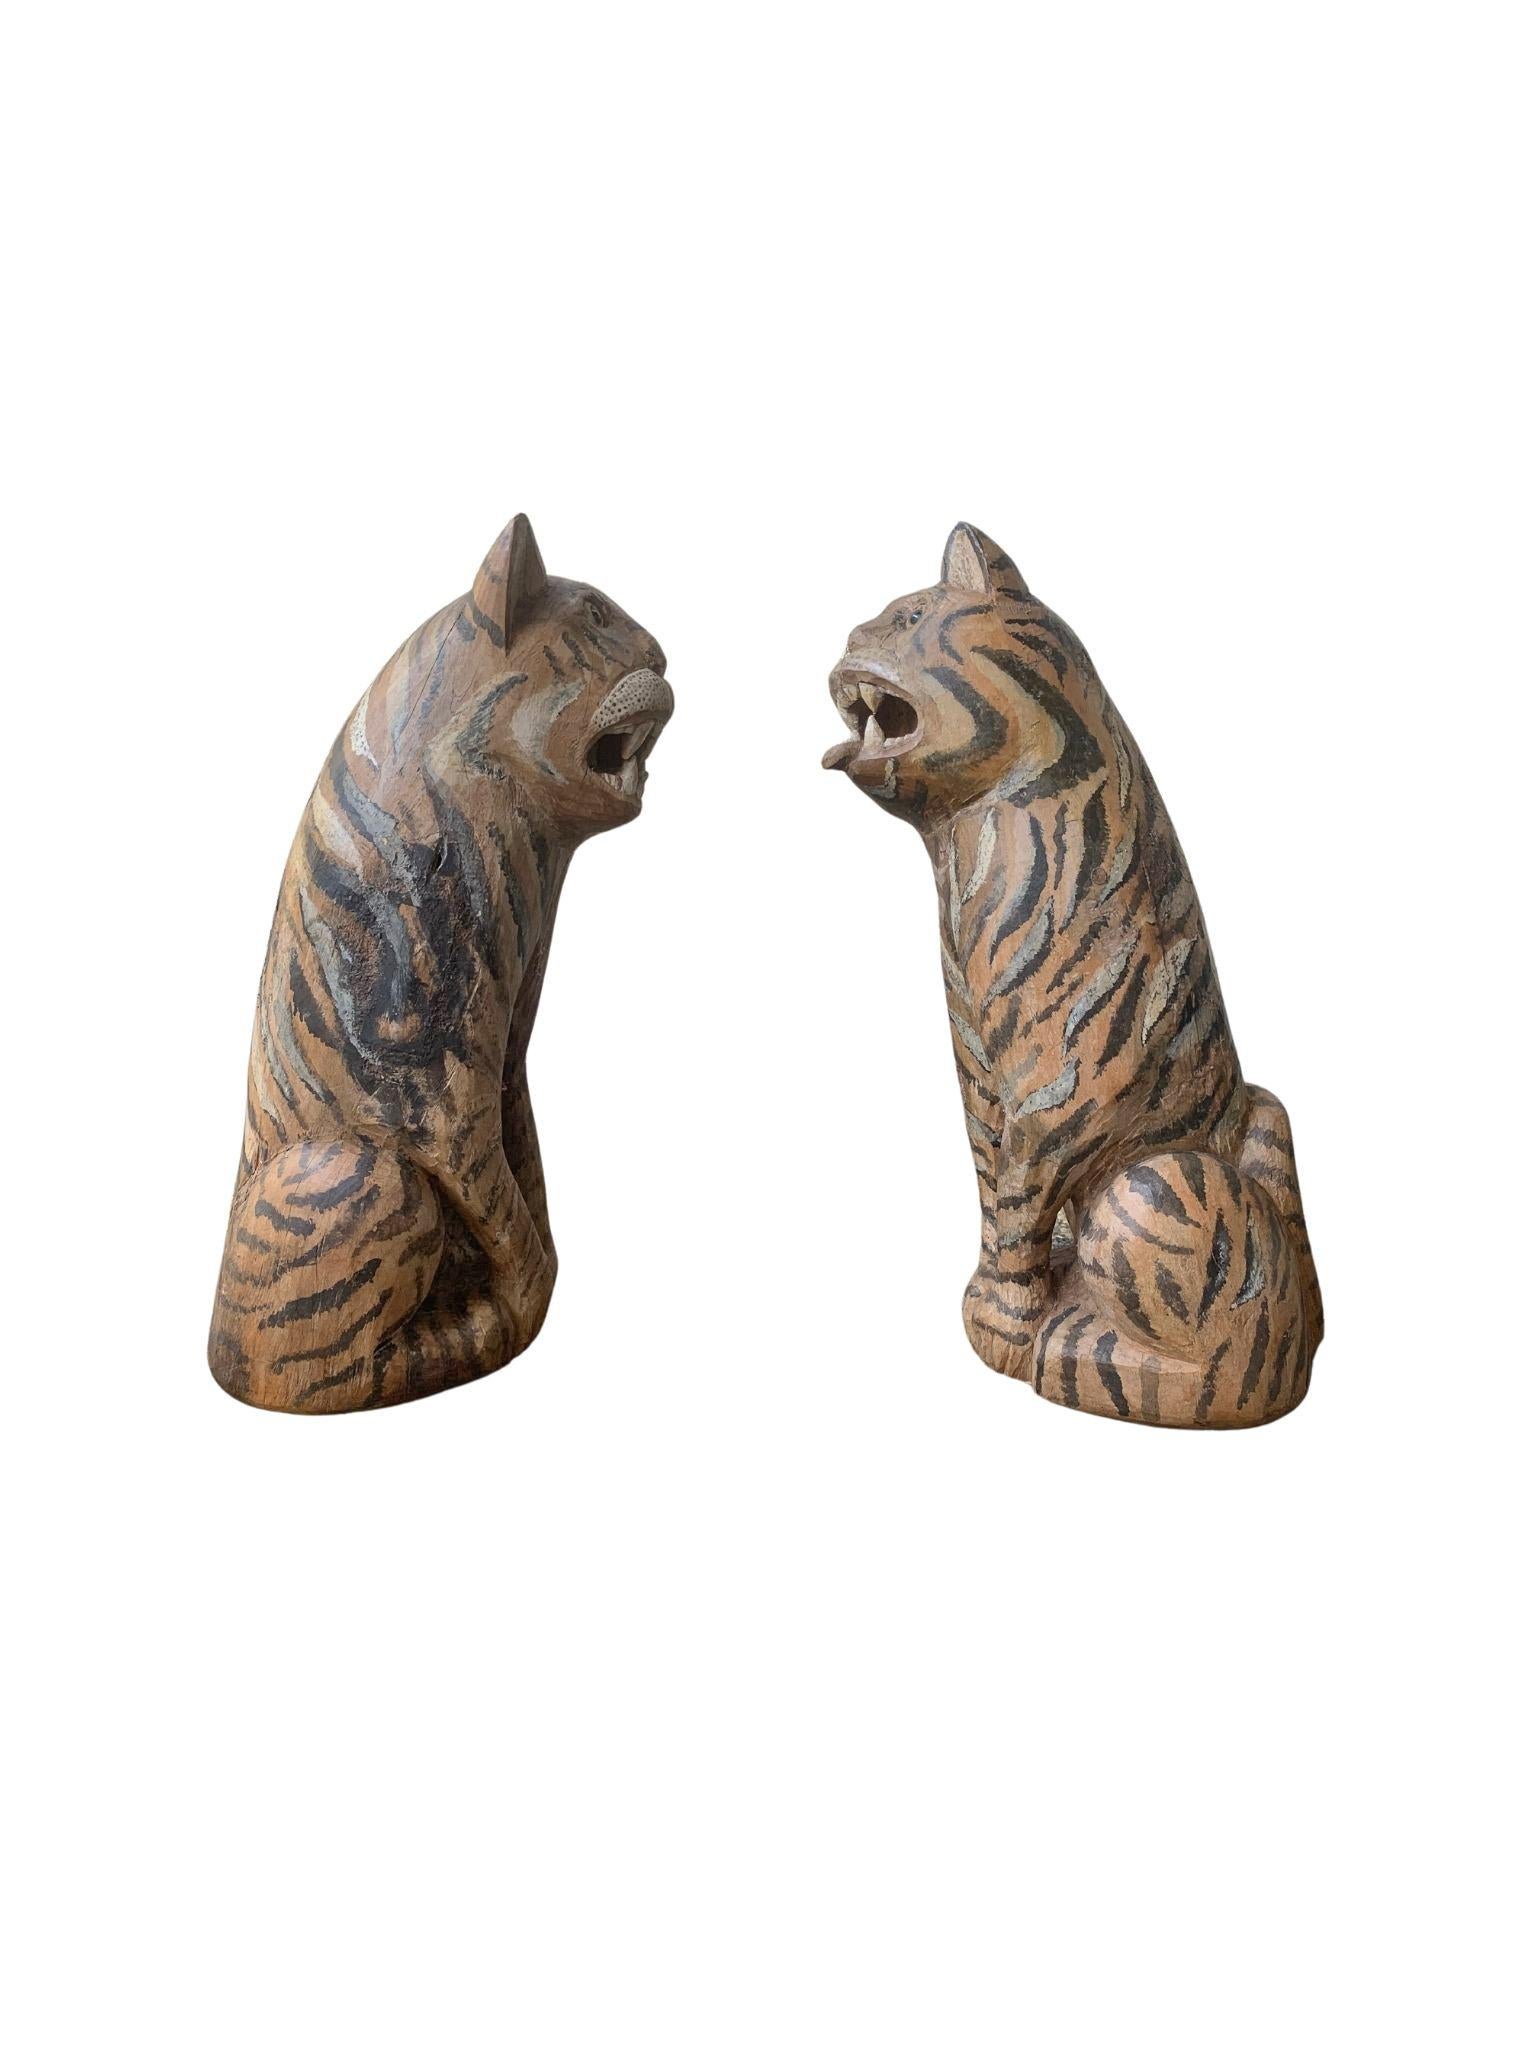 Indonesian Pair of Vintage Hand-Crafted Tiger Sculpture / Statue from Java, Indonesia  For Sale